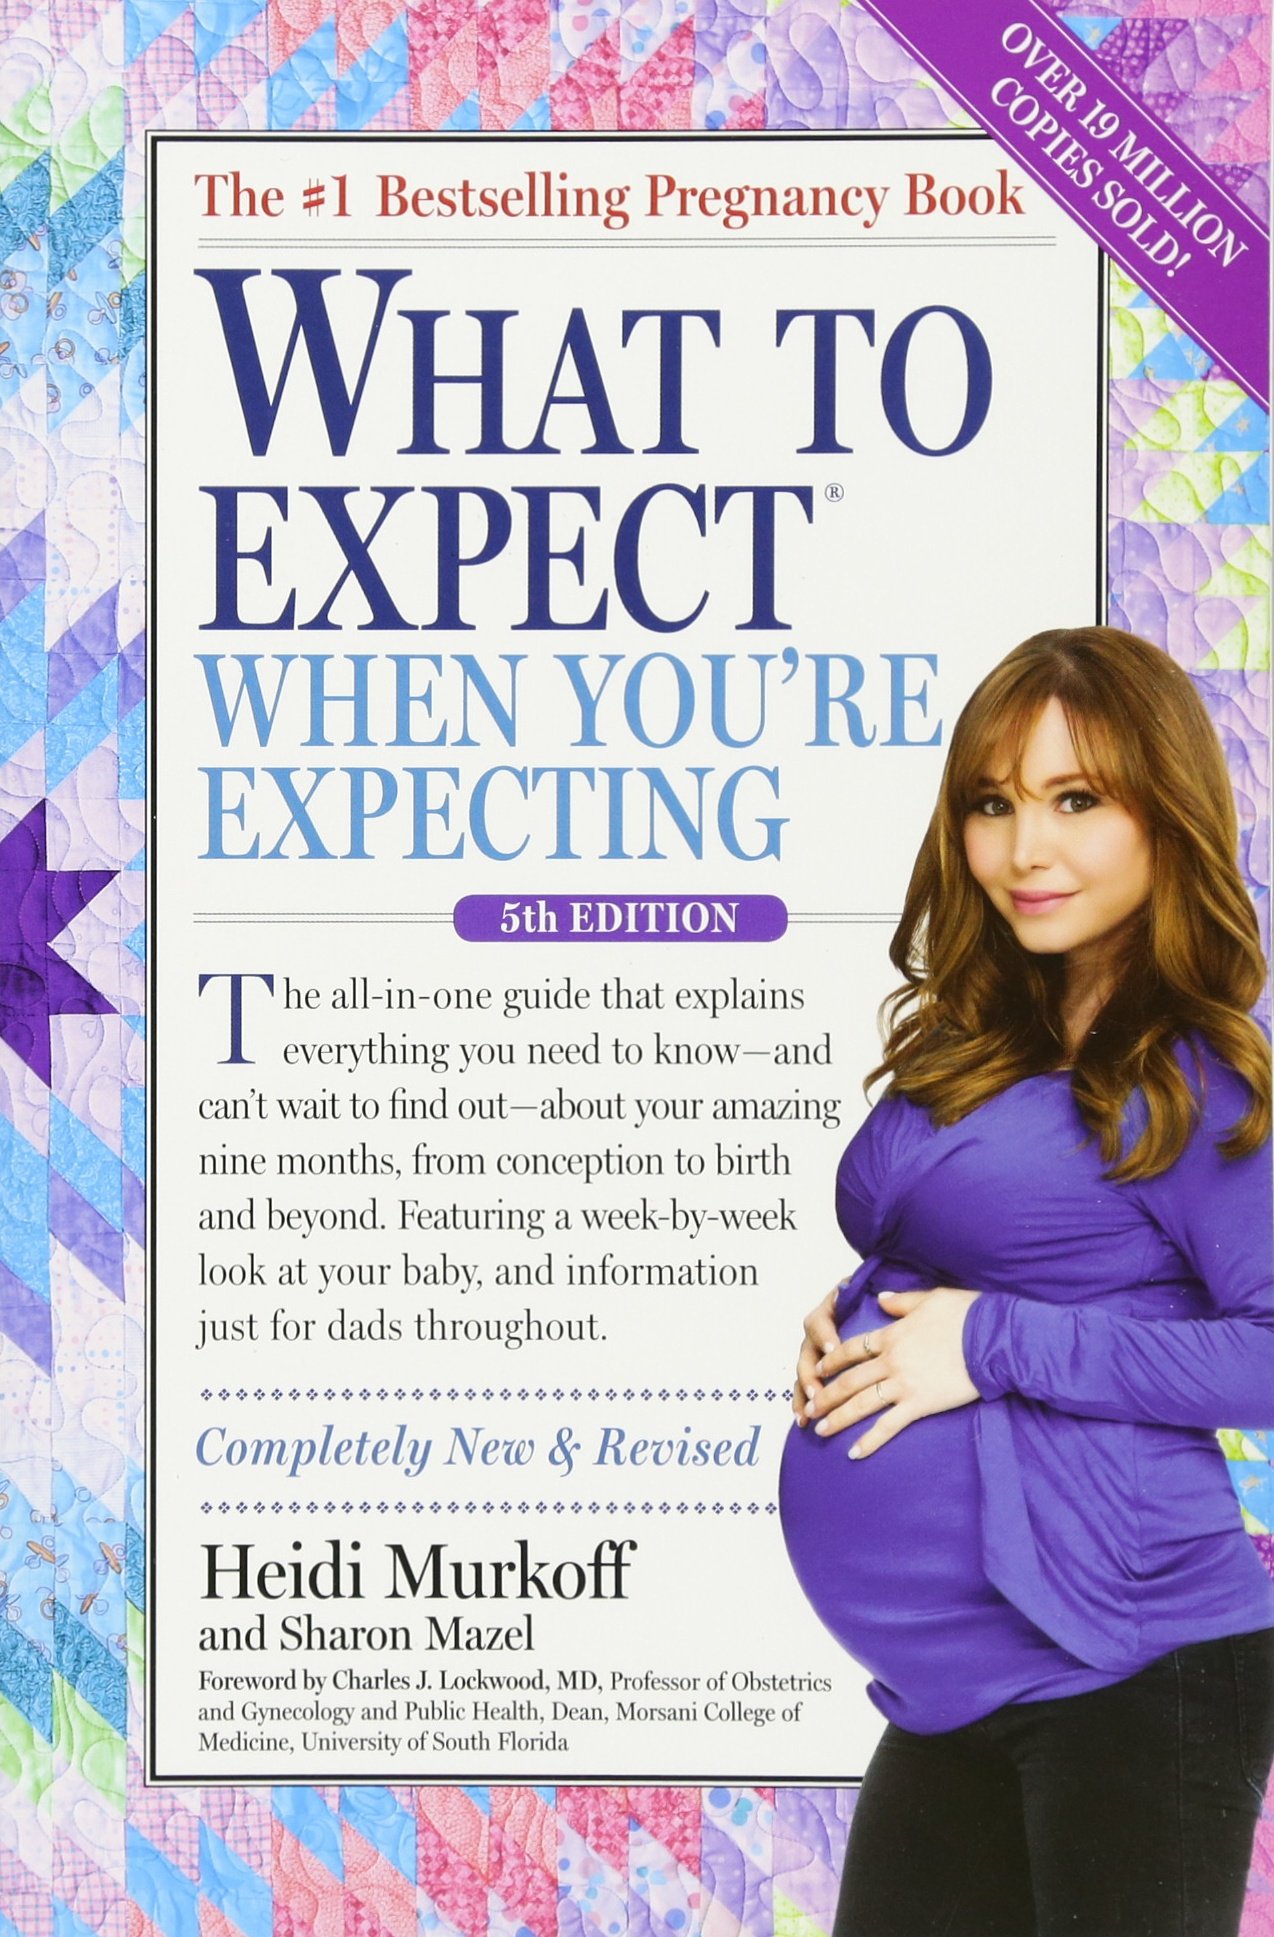 What to Expect When You're Expecting Summary